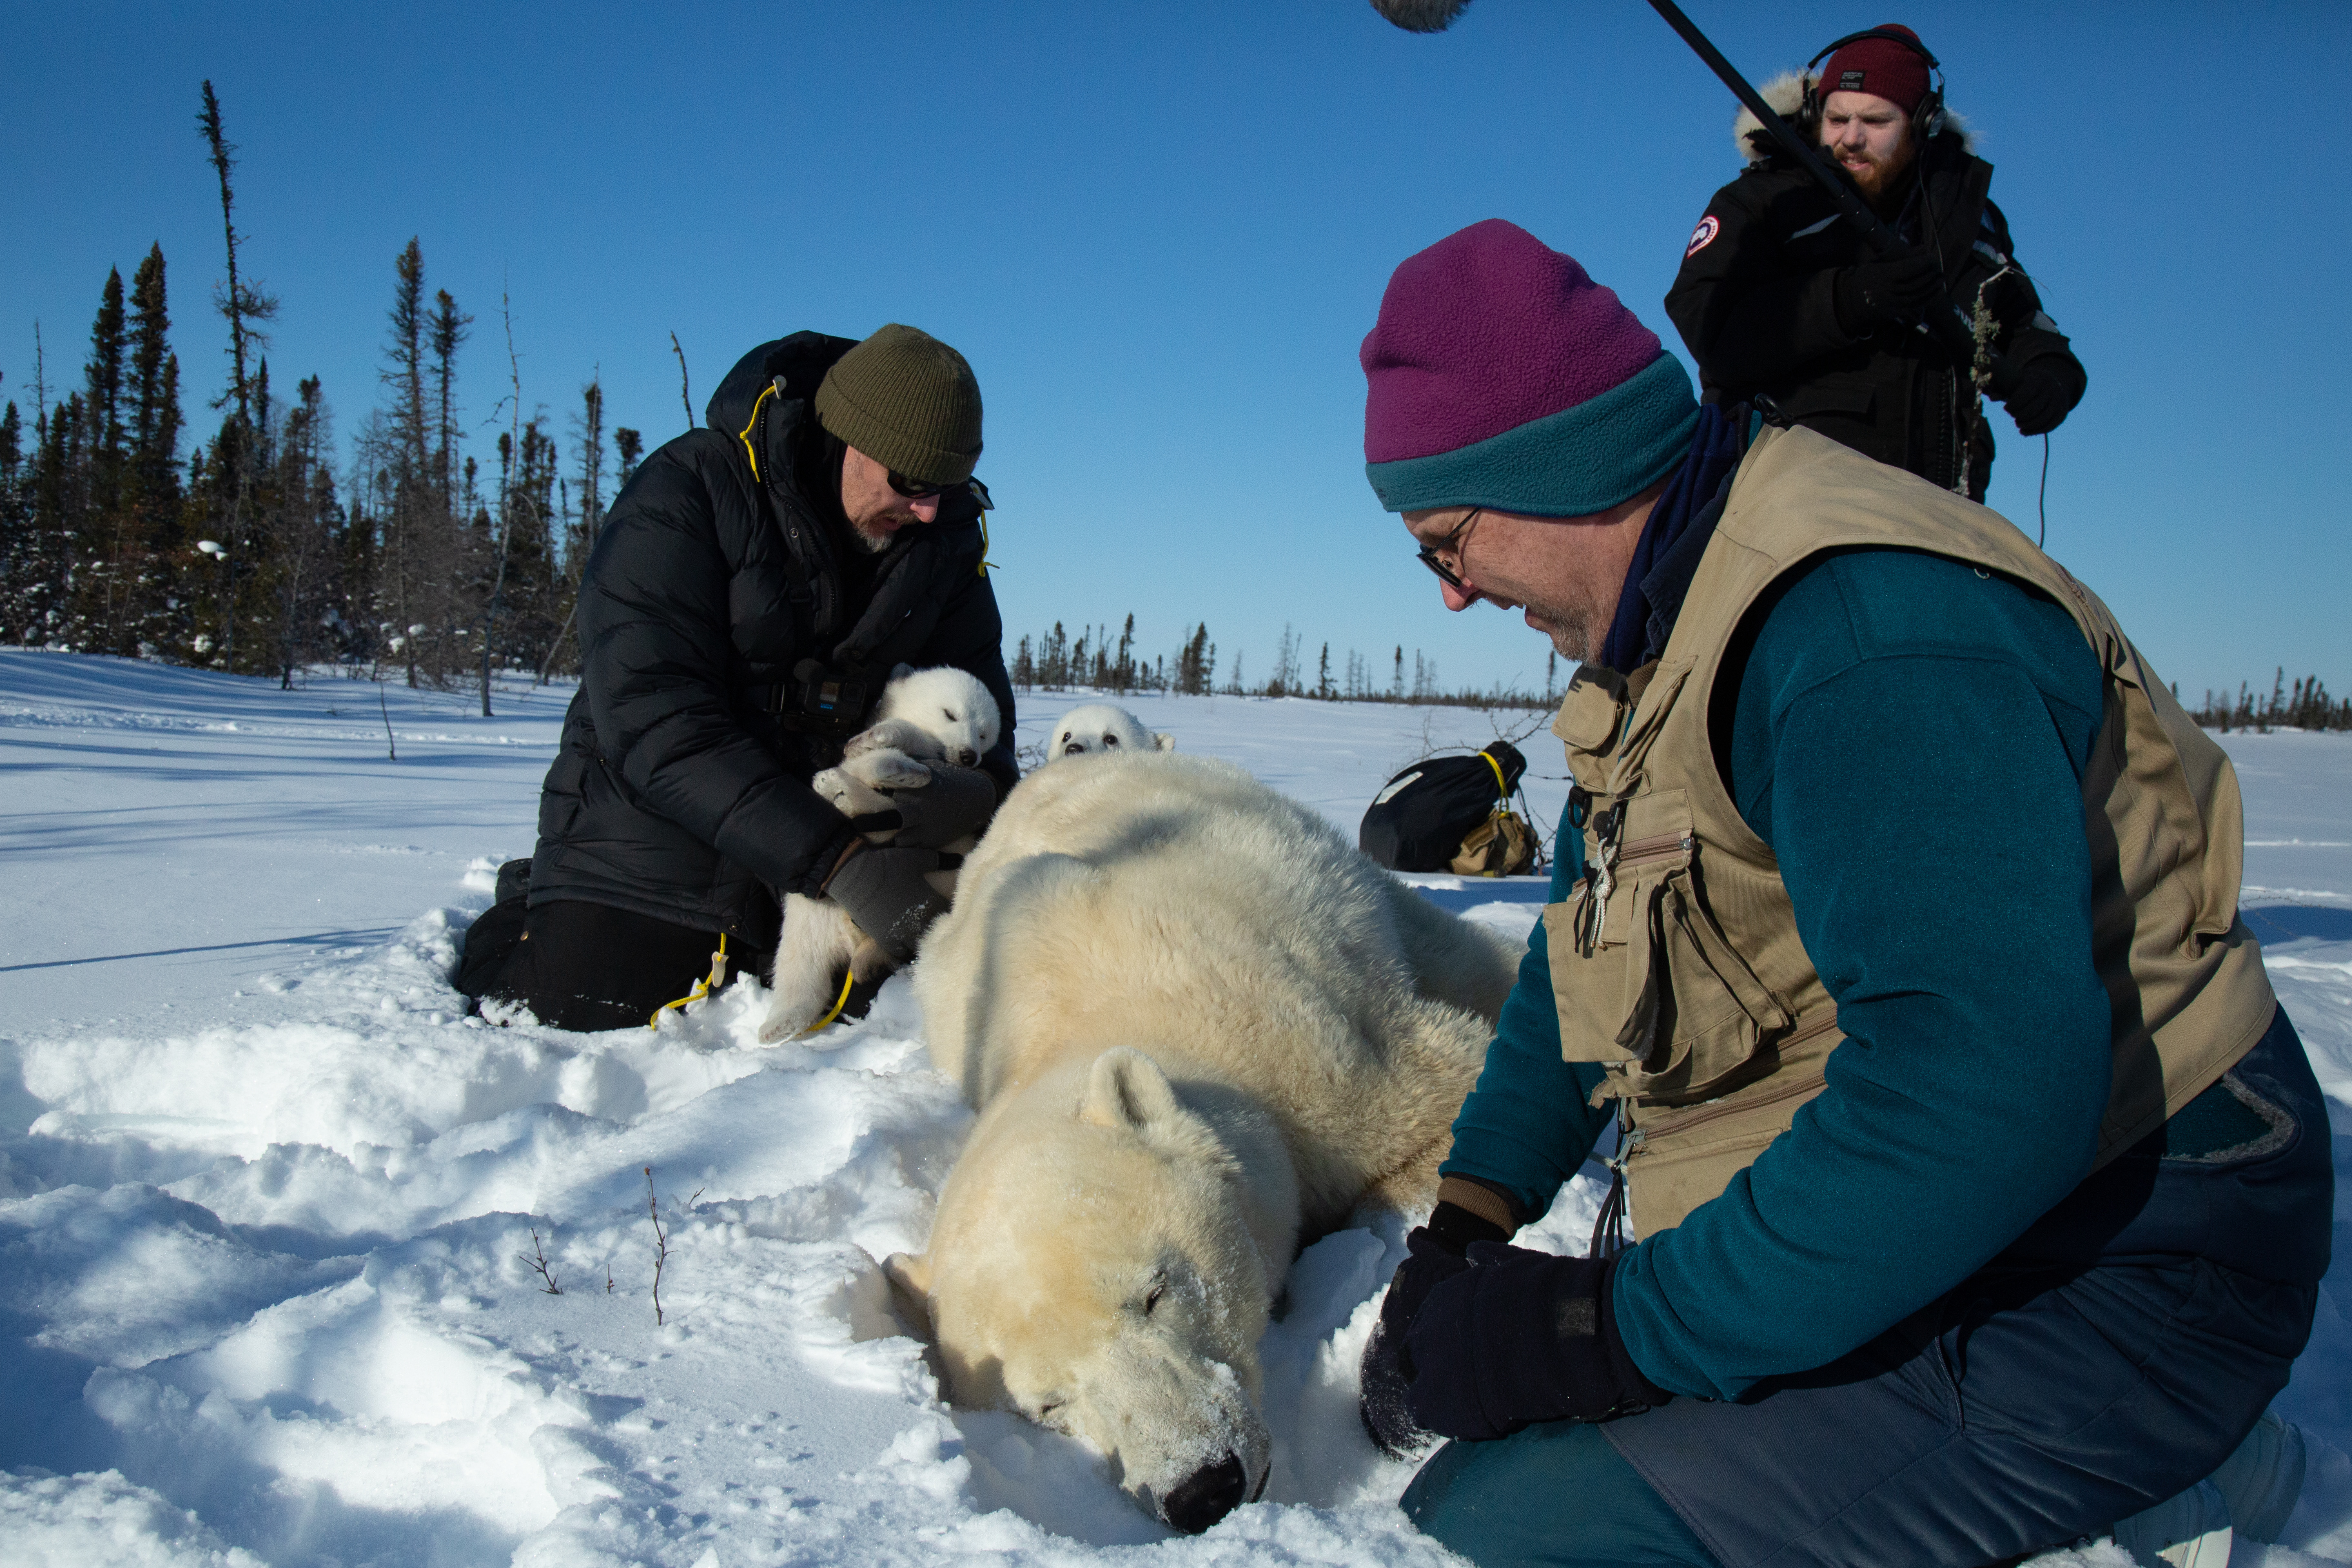 KUOW - The polar bears of Hudson Bay: cubs, climate, and calories, part 2